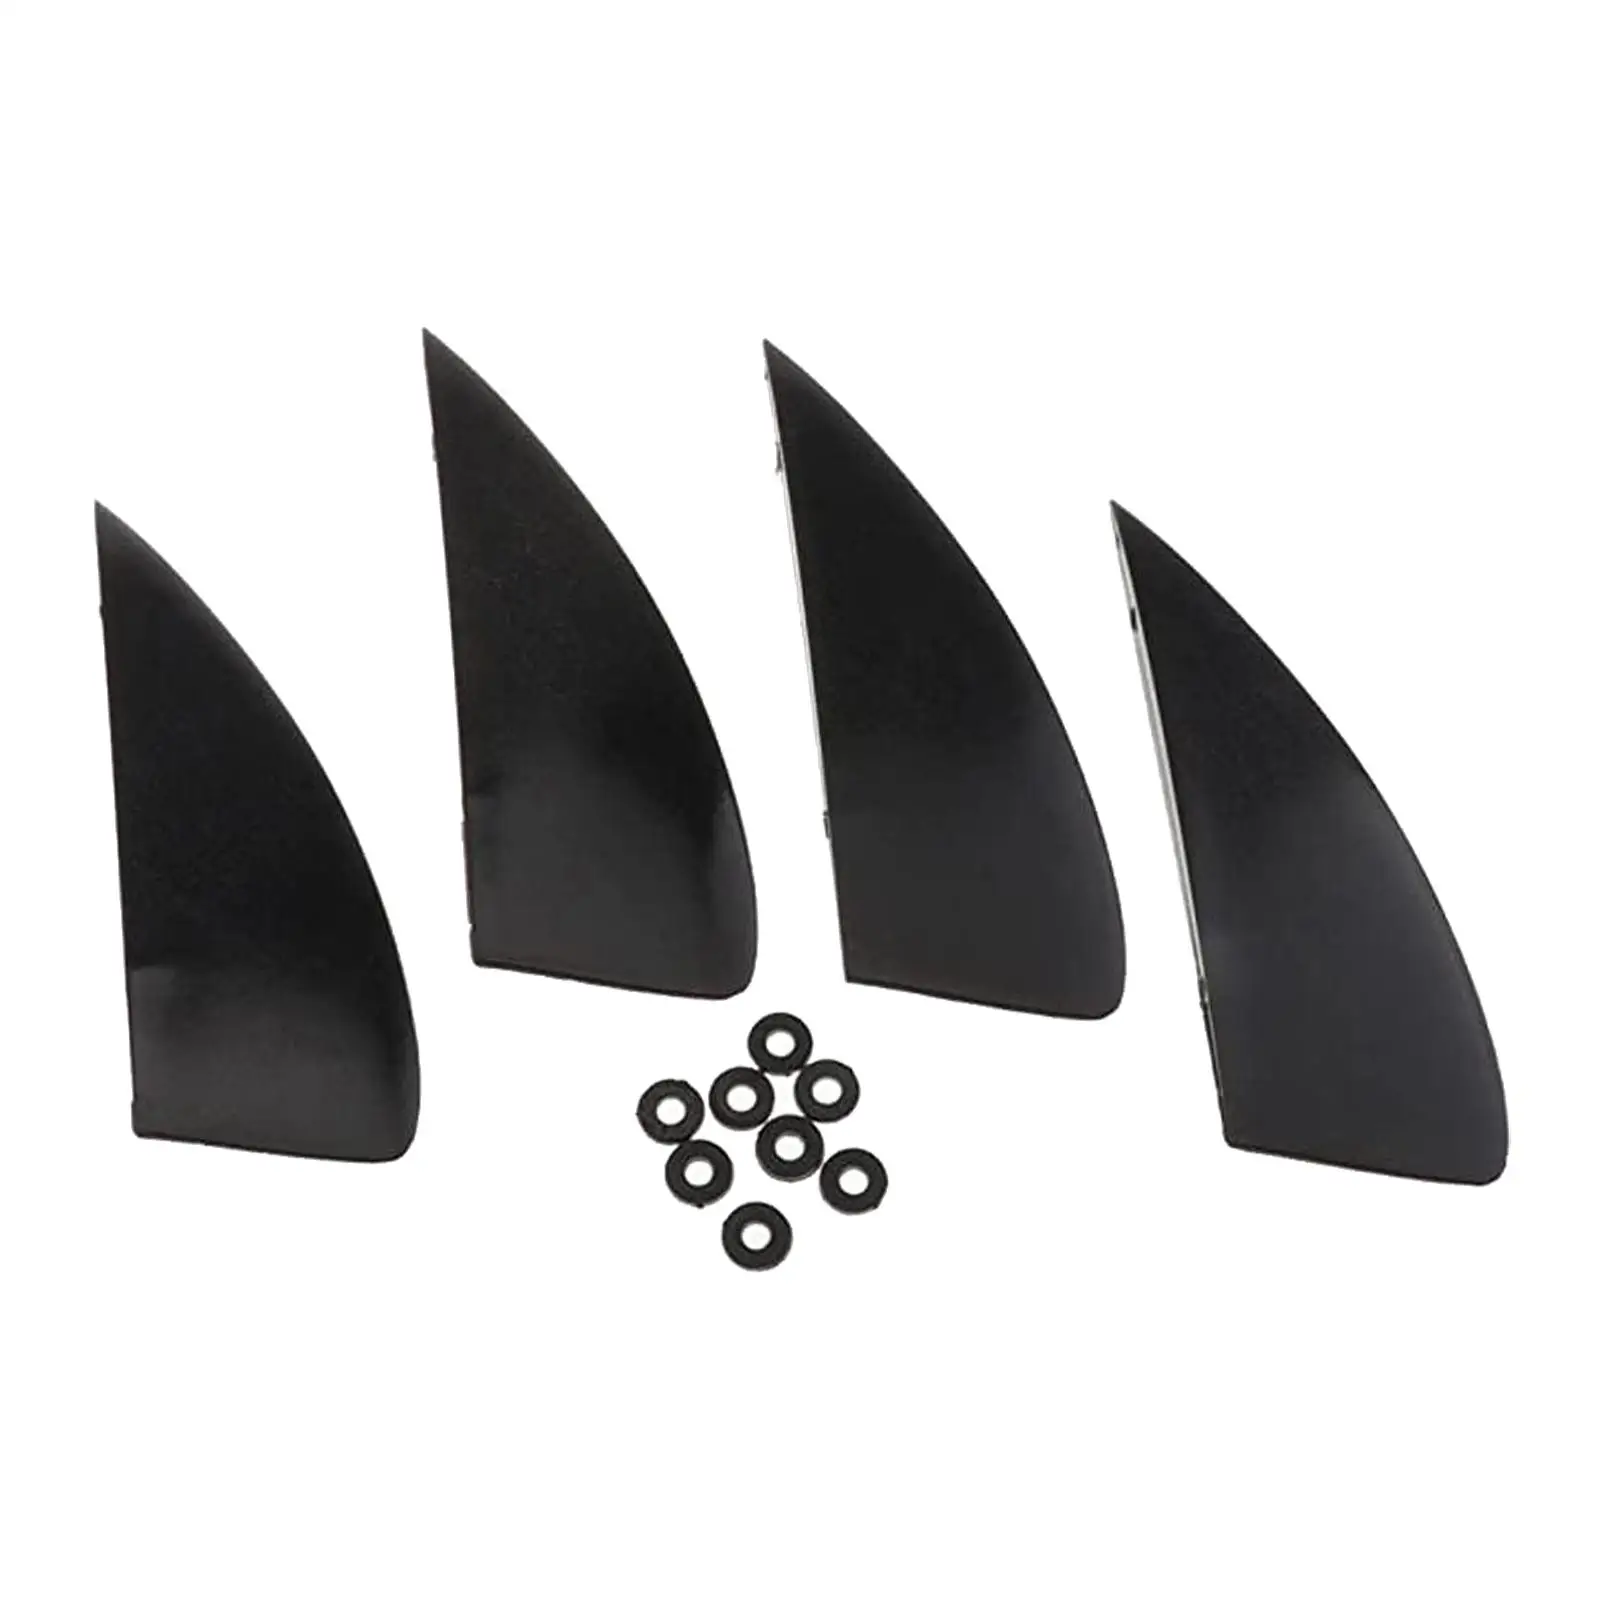 4x Kiteboard Fin with 8 Gasket Wakeboard Replacement Fins Surfboard Fins for Paddleboard Longboard Beach Surfing Water Sports